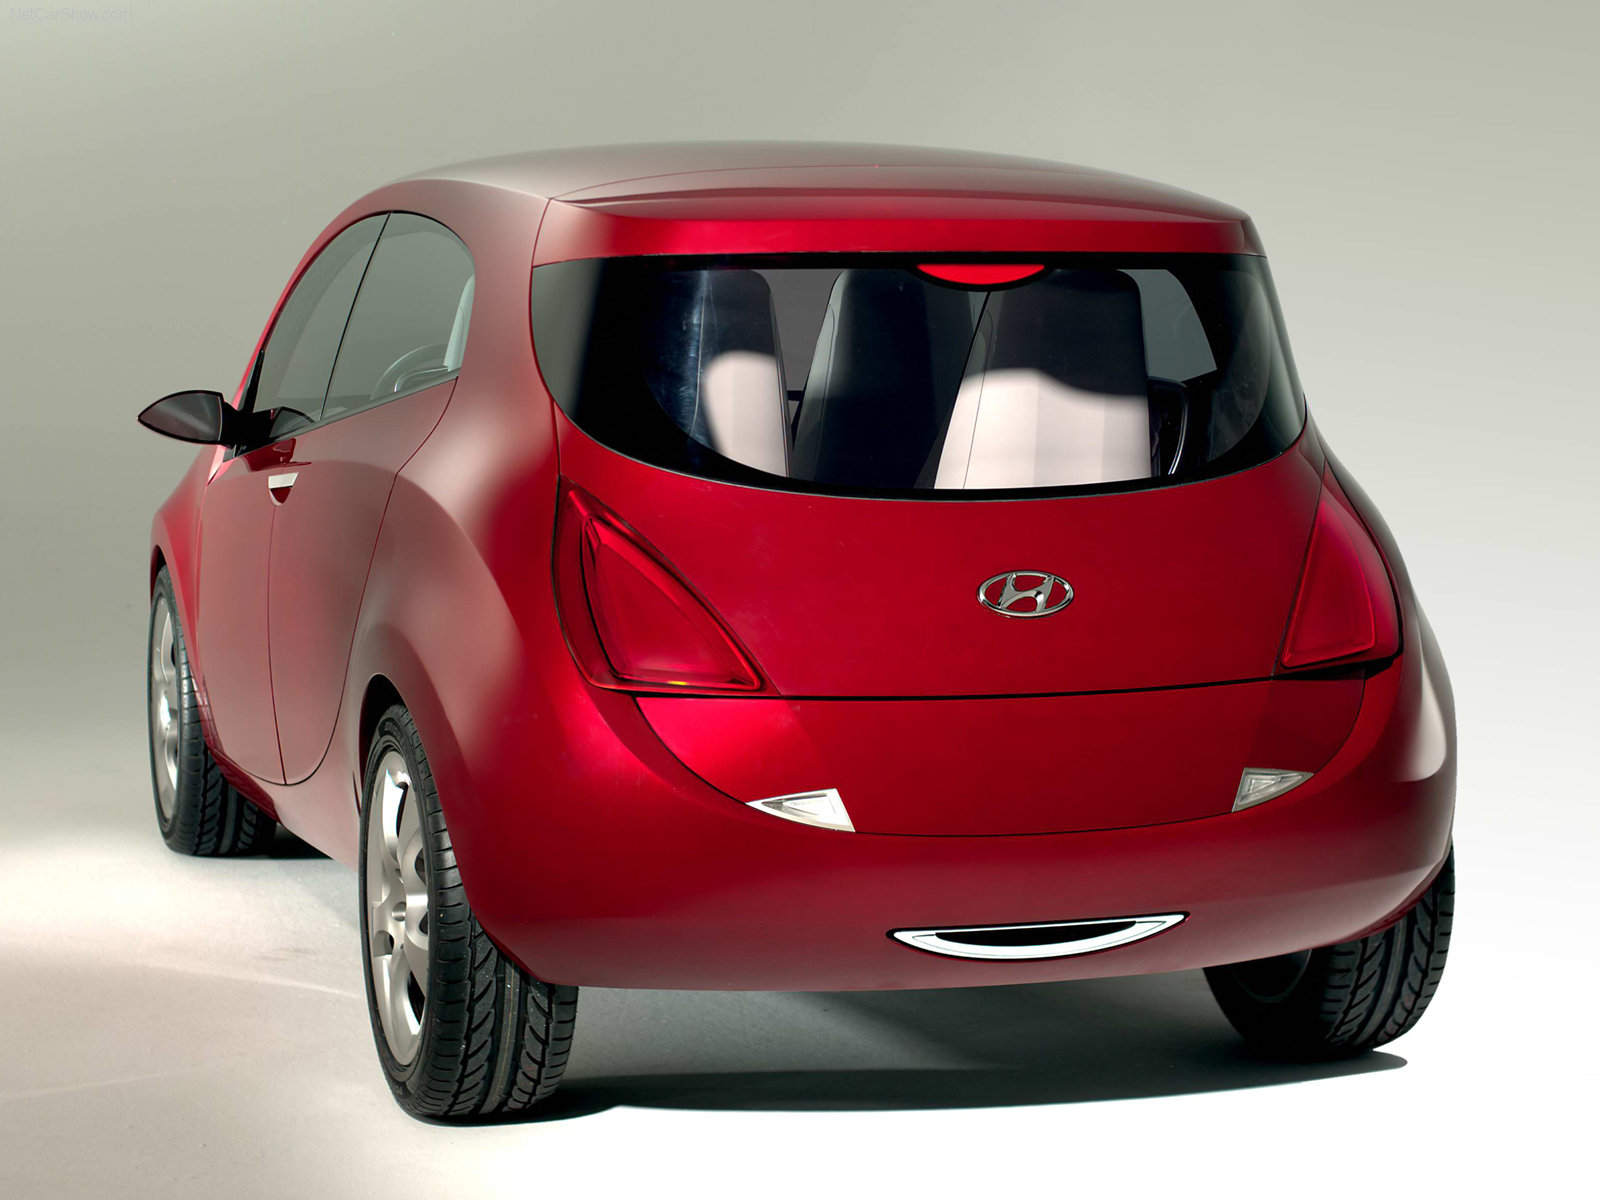 Hyundai HED 1 Concept 2005 Hyundai-HED_1_Concept-2005-1600-02